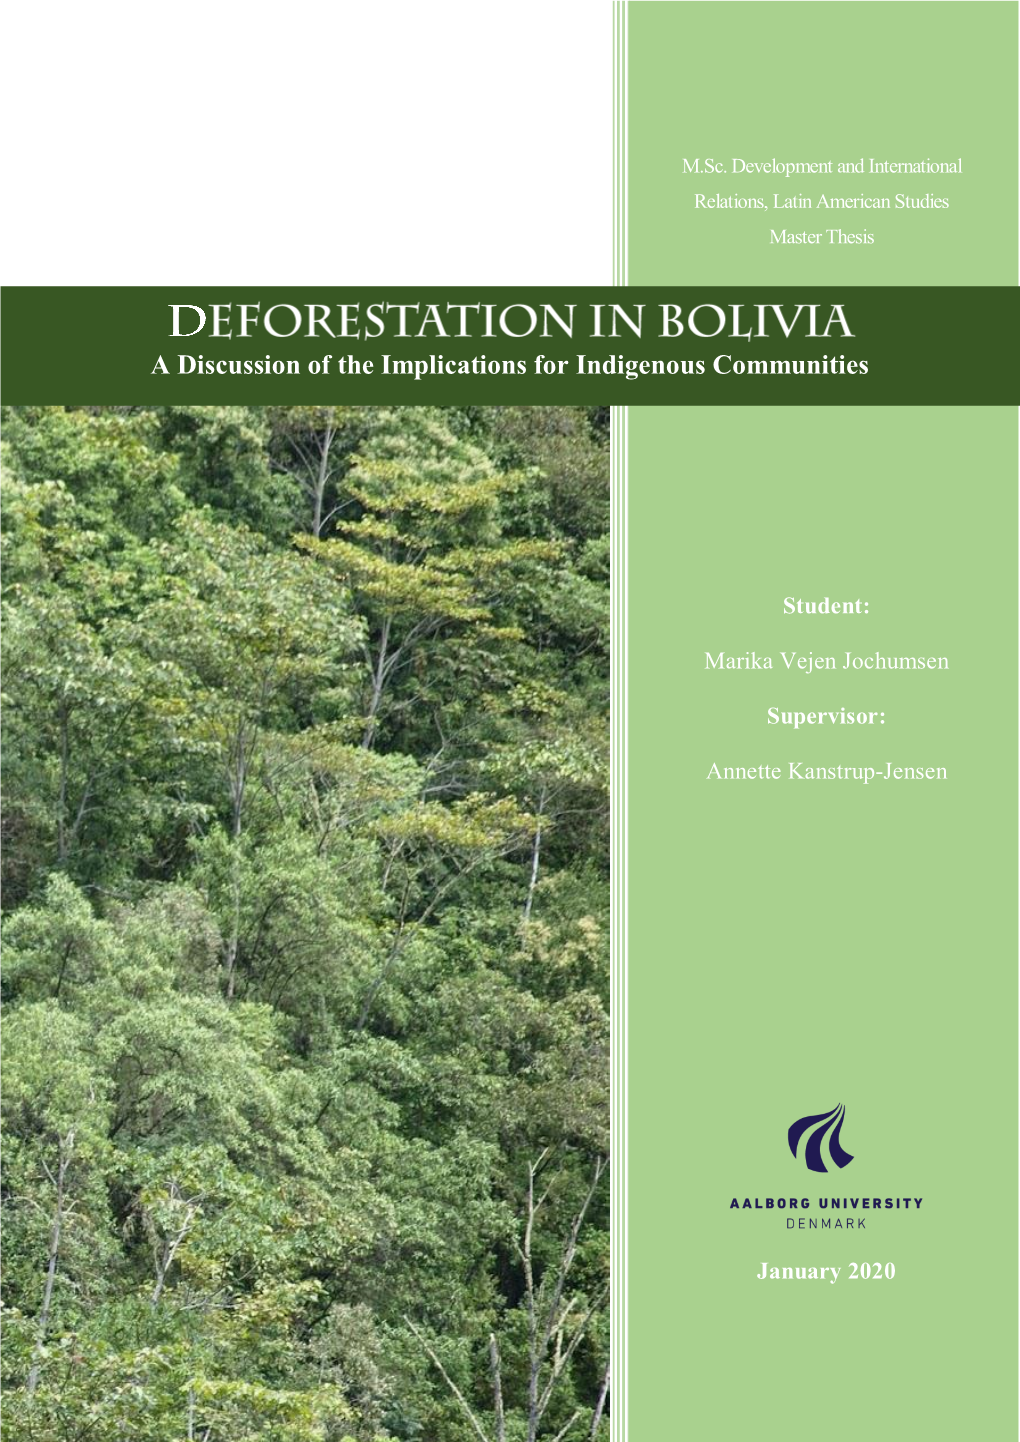 Deforestation in Bolivia – a Discussion of the Implications for Indigenous Communities